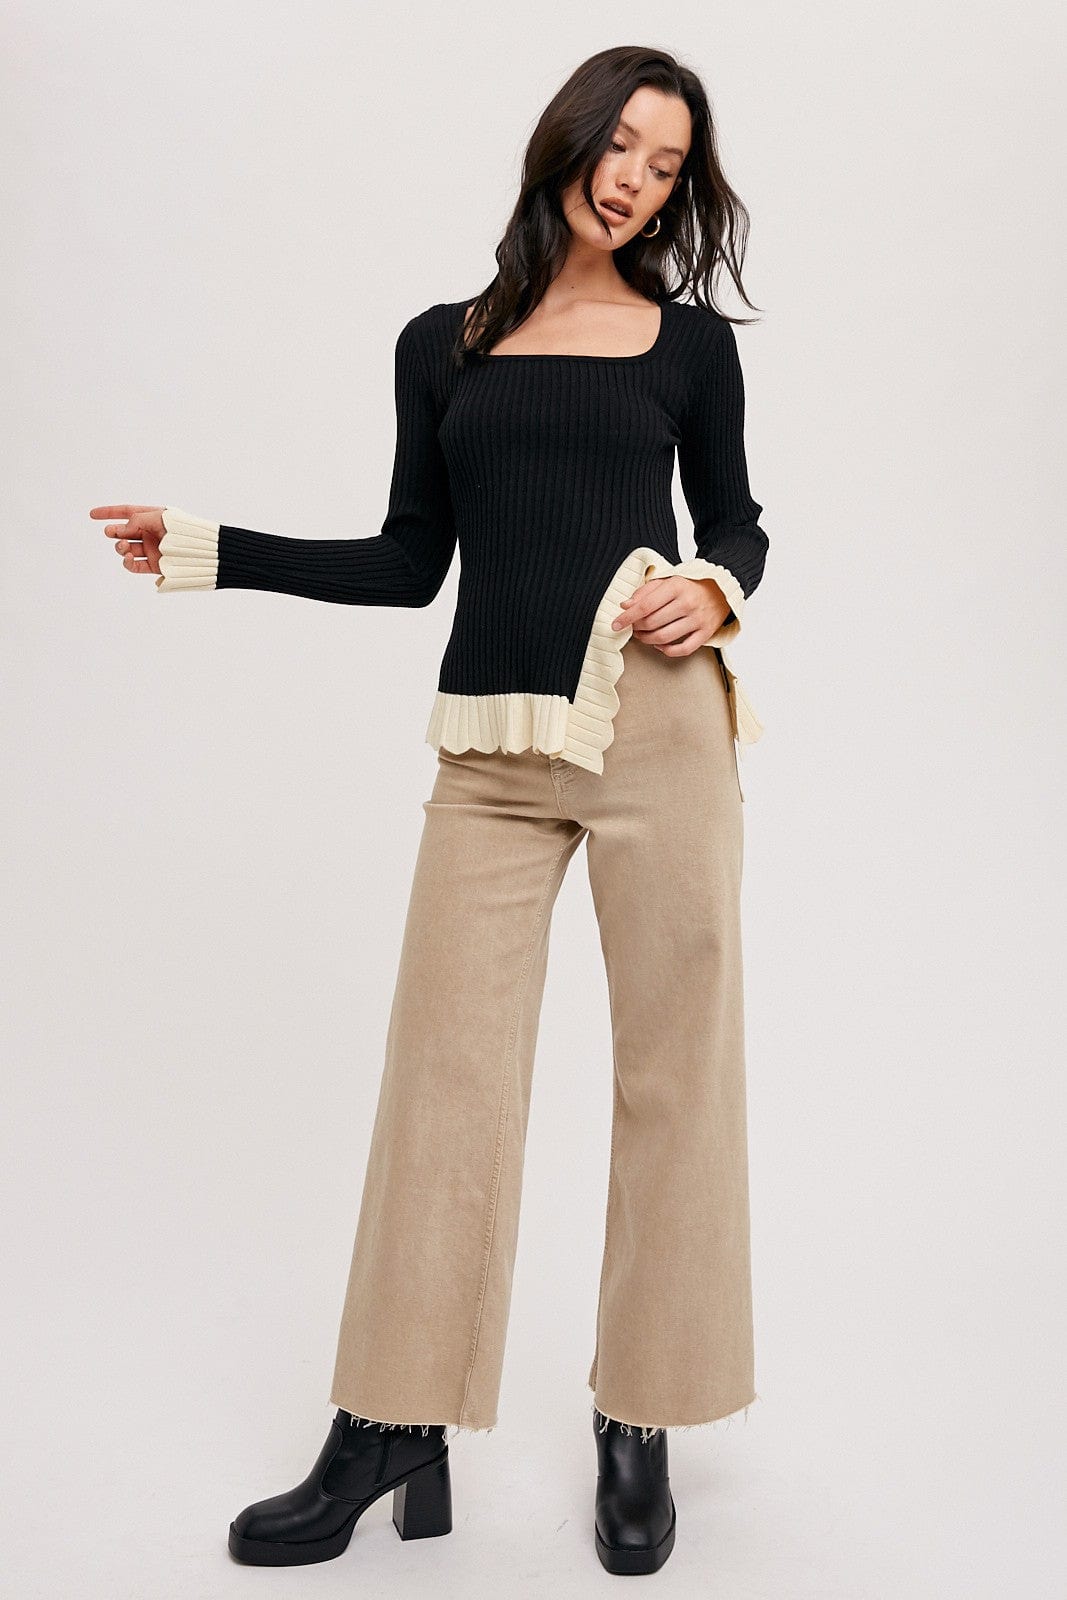 Bluivy Shirts & Tops SIDE SLIT RIBBED SQUARE NECK KNIT